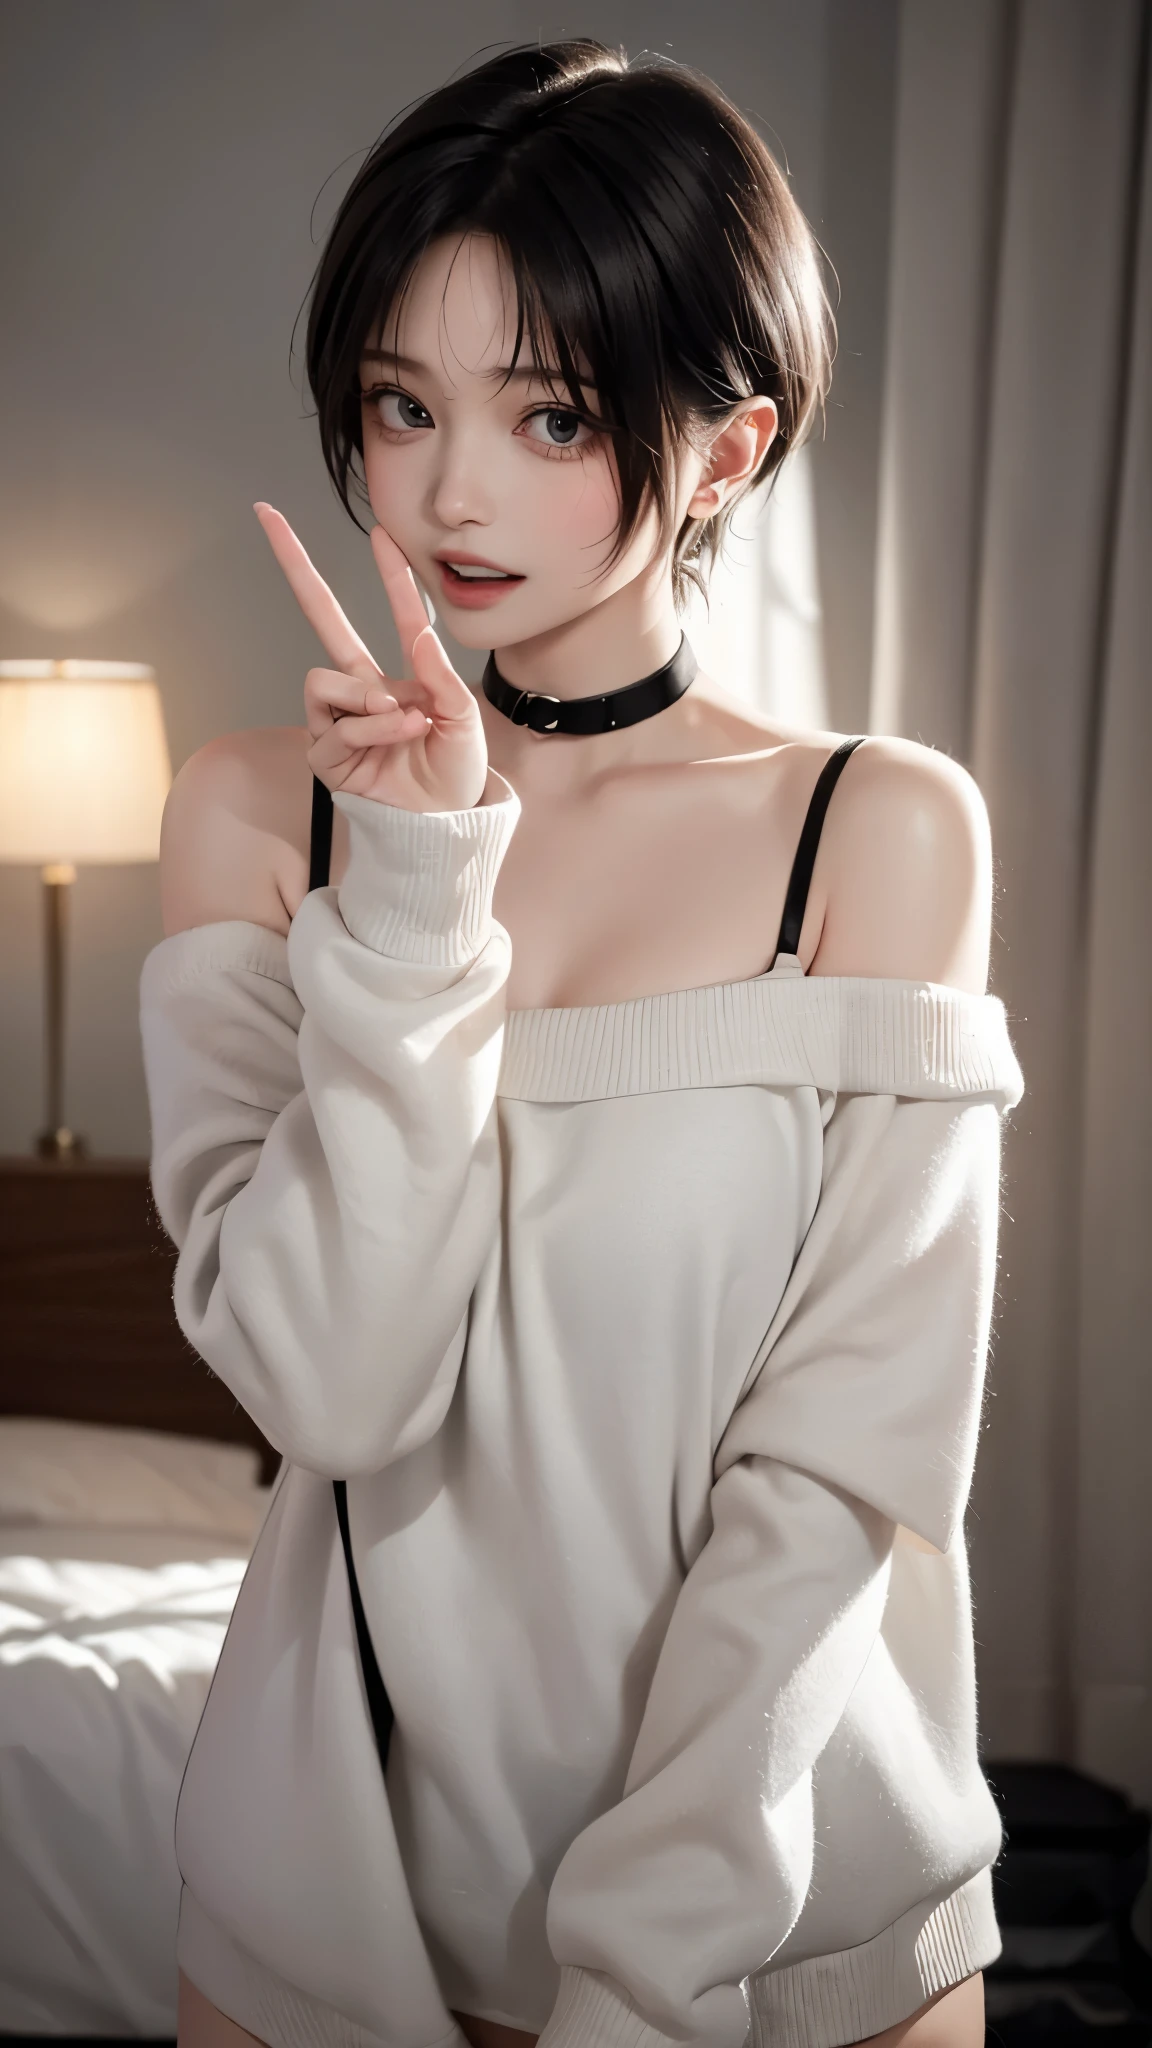 1 Girl、solo、masterpiece,highest quality,High resolution,Very detailed, skinny,Black Choker,Earrings,Big cleavage、Off-the-shoulder tight sweater dress,

 (( Peace sign with both hands)), (Blowjob Gestures:1.5), (((Open your mouth))), Heavy breathing , (aheghentai face), 
pixie short hair、
Accurate 5-finger、Accurate human body、The perfect human body、((Captivating smile ))、

Boyfriend room、A Guys room、A light-off room at night、indoor、High School Boy's Room、Detailed Background、